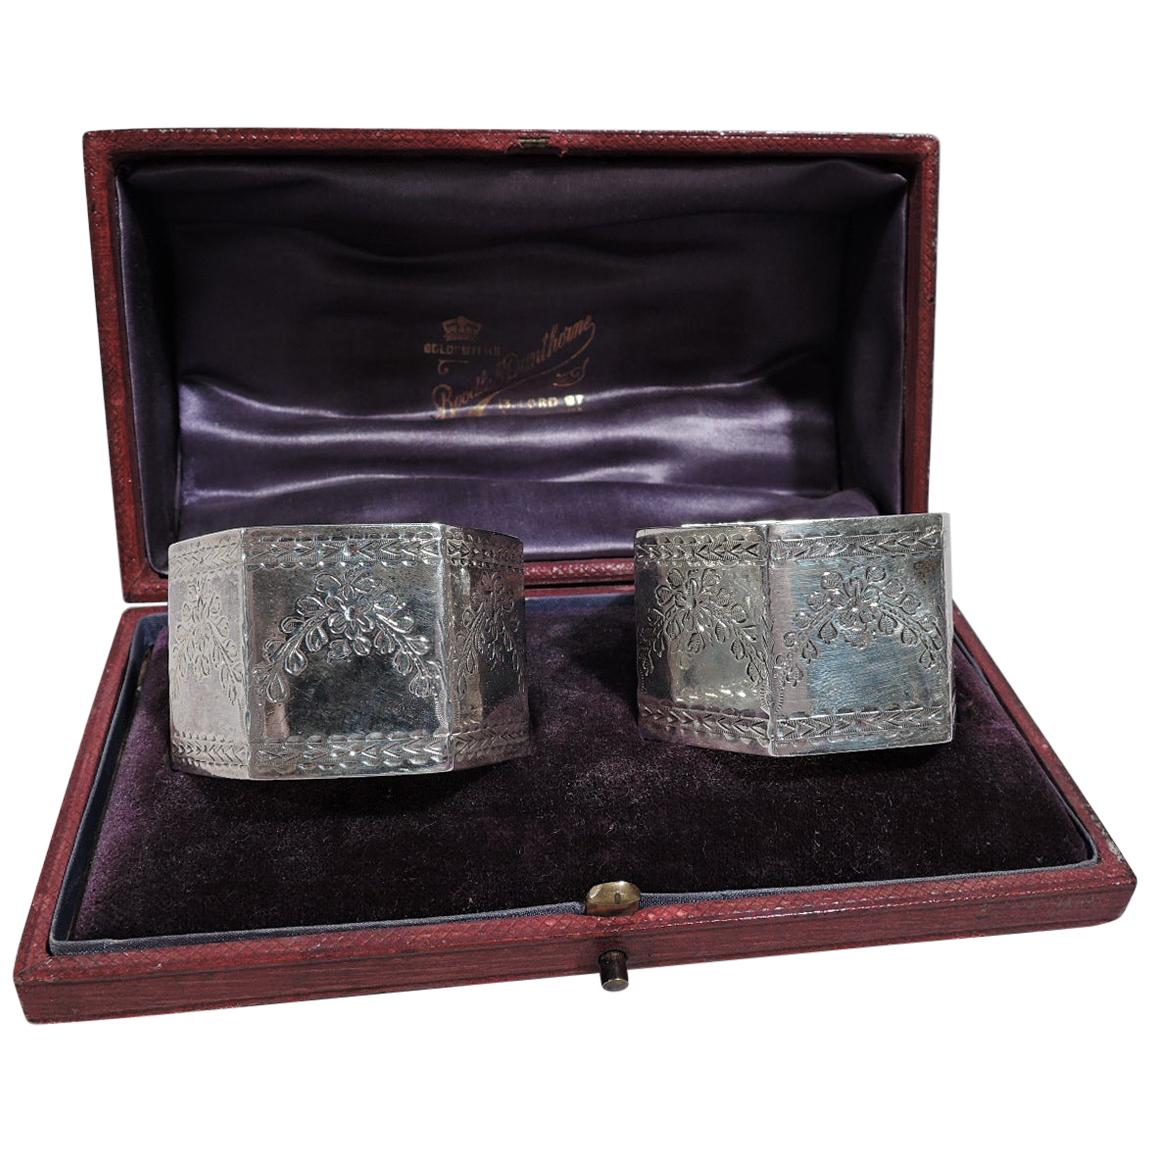 Pair of Antique English Sterling Silver Napkin Rings